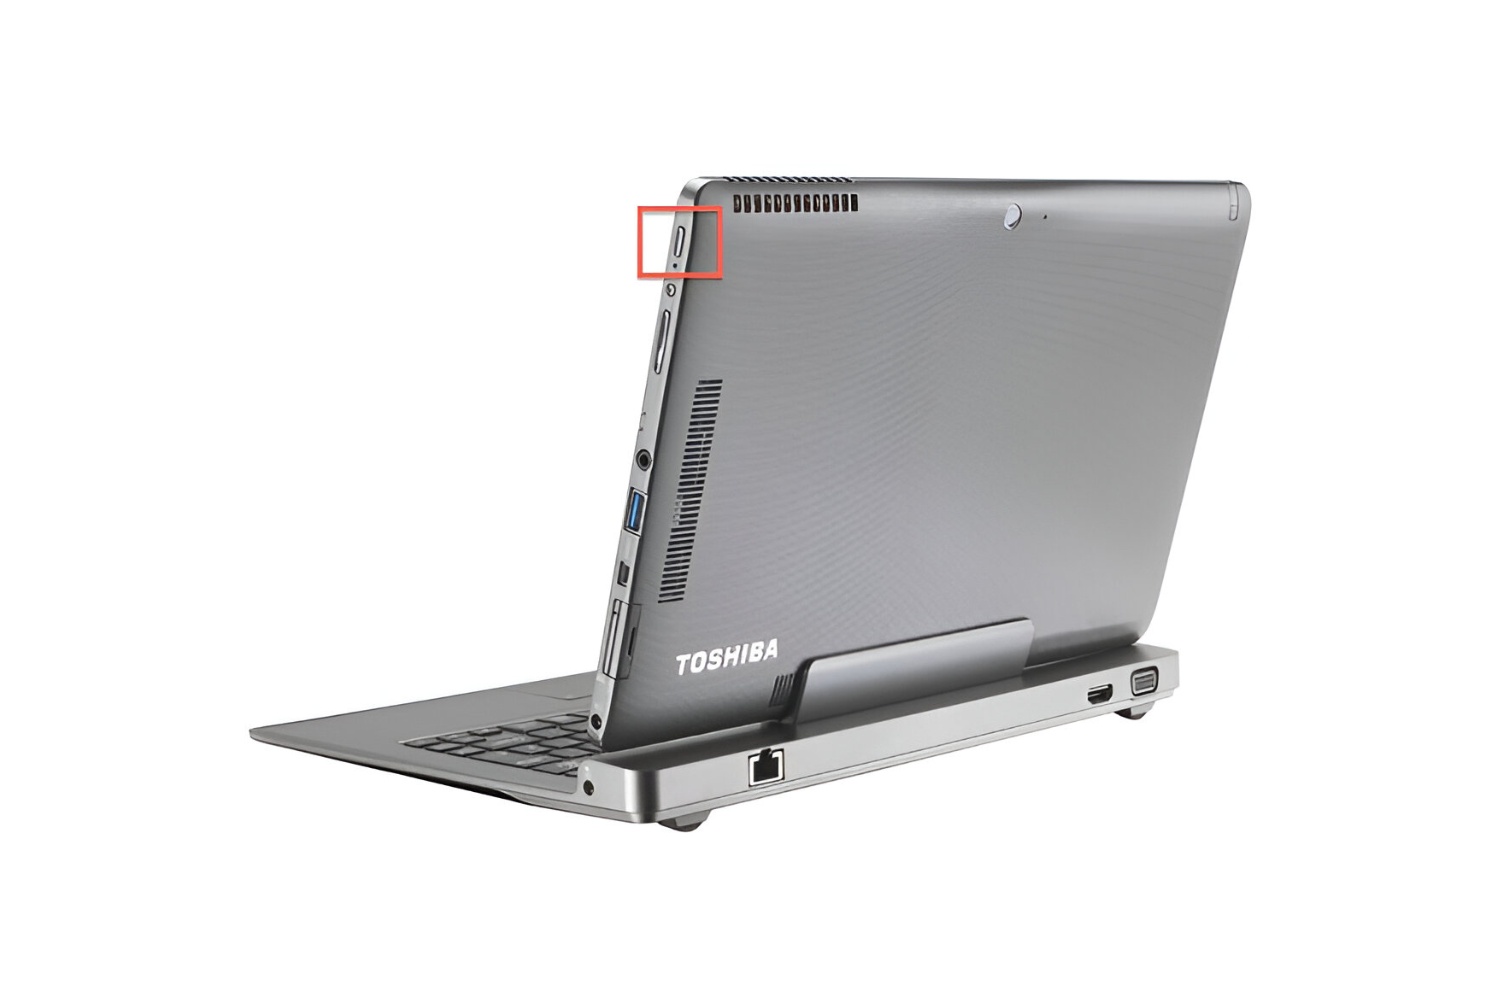 How To Get Into BIOS On Toshiba Ultrabook